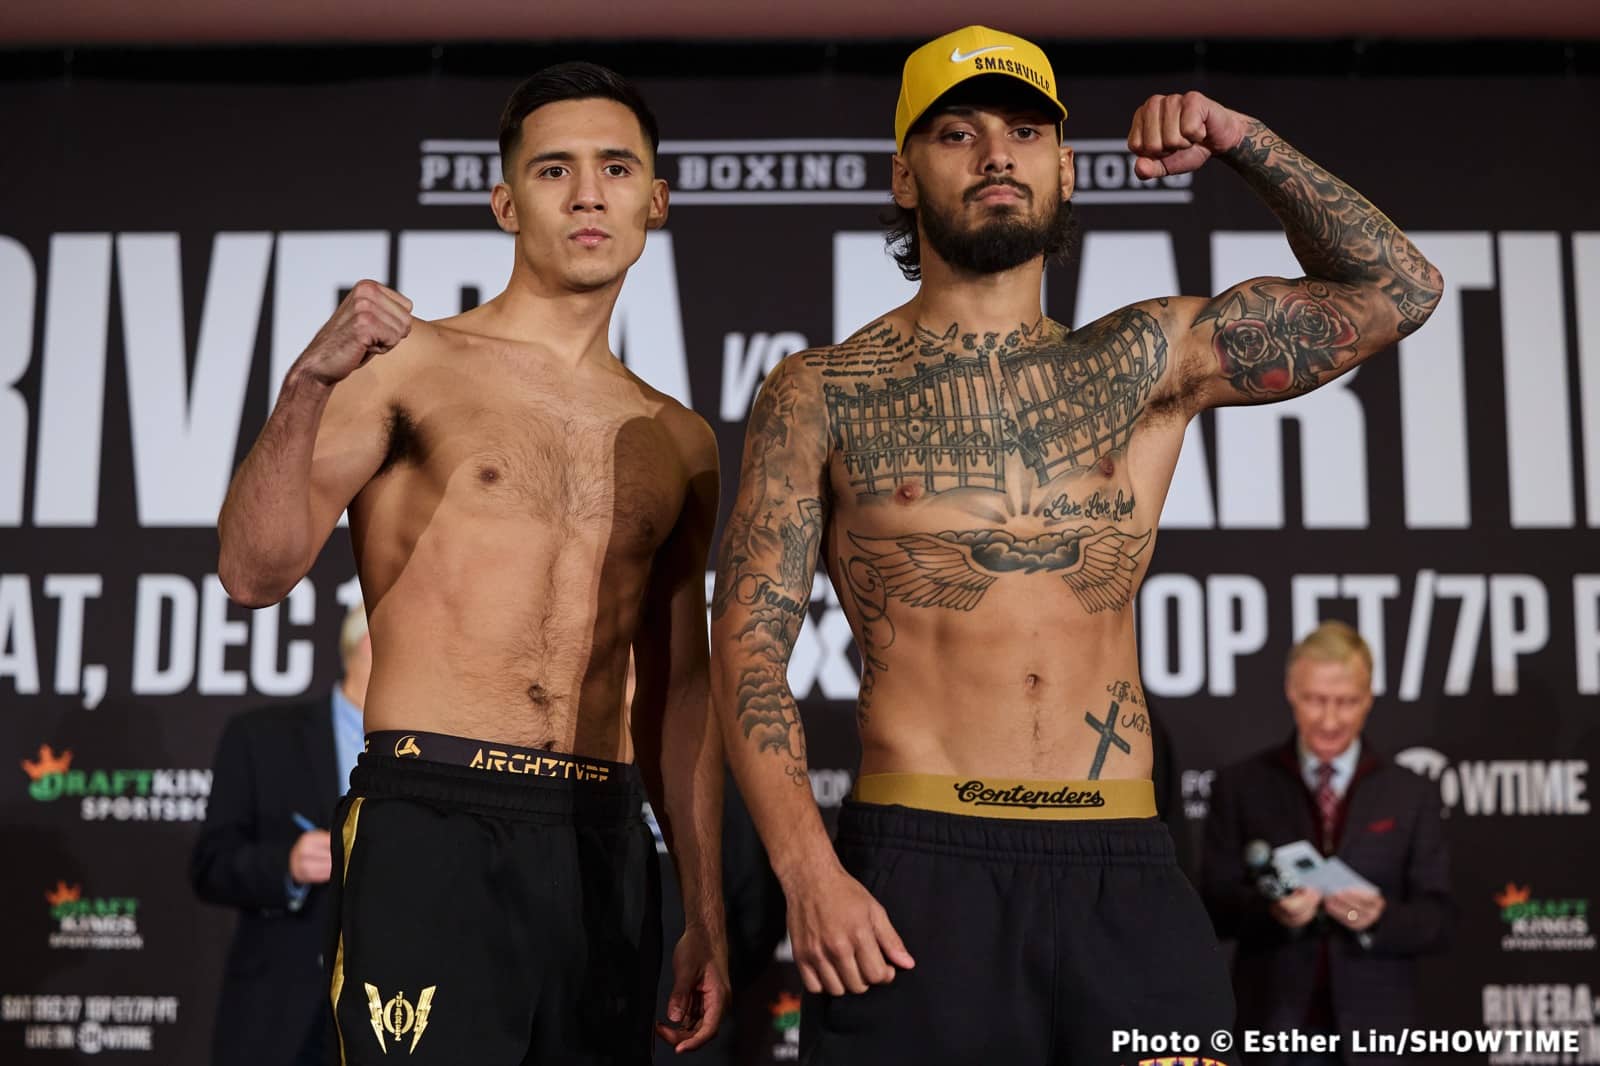 Michel Rivera vs. Frank Martin - weights for Saturday on Showtime